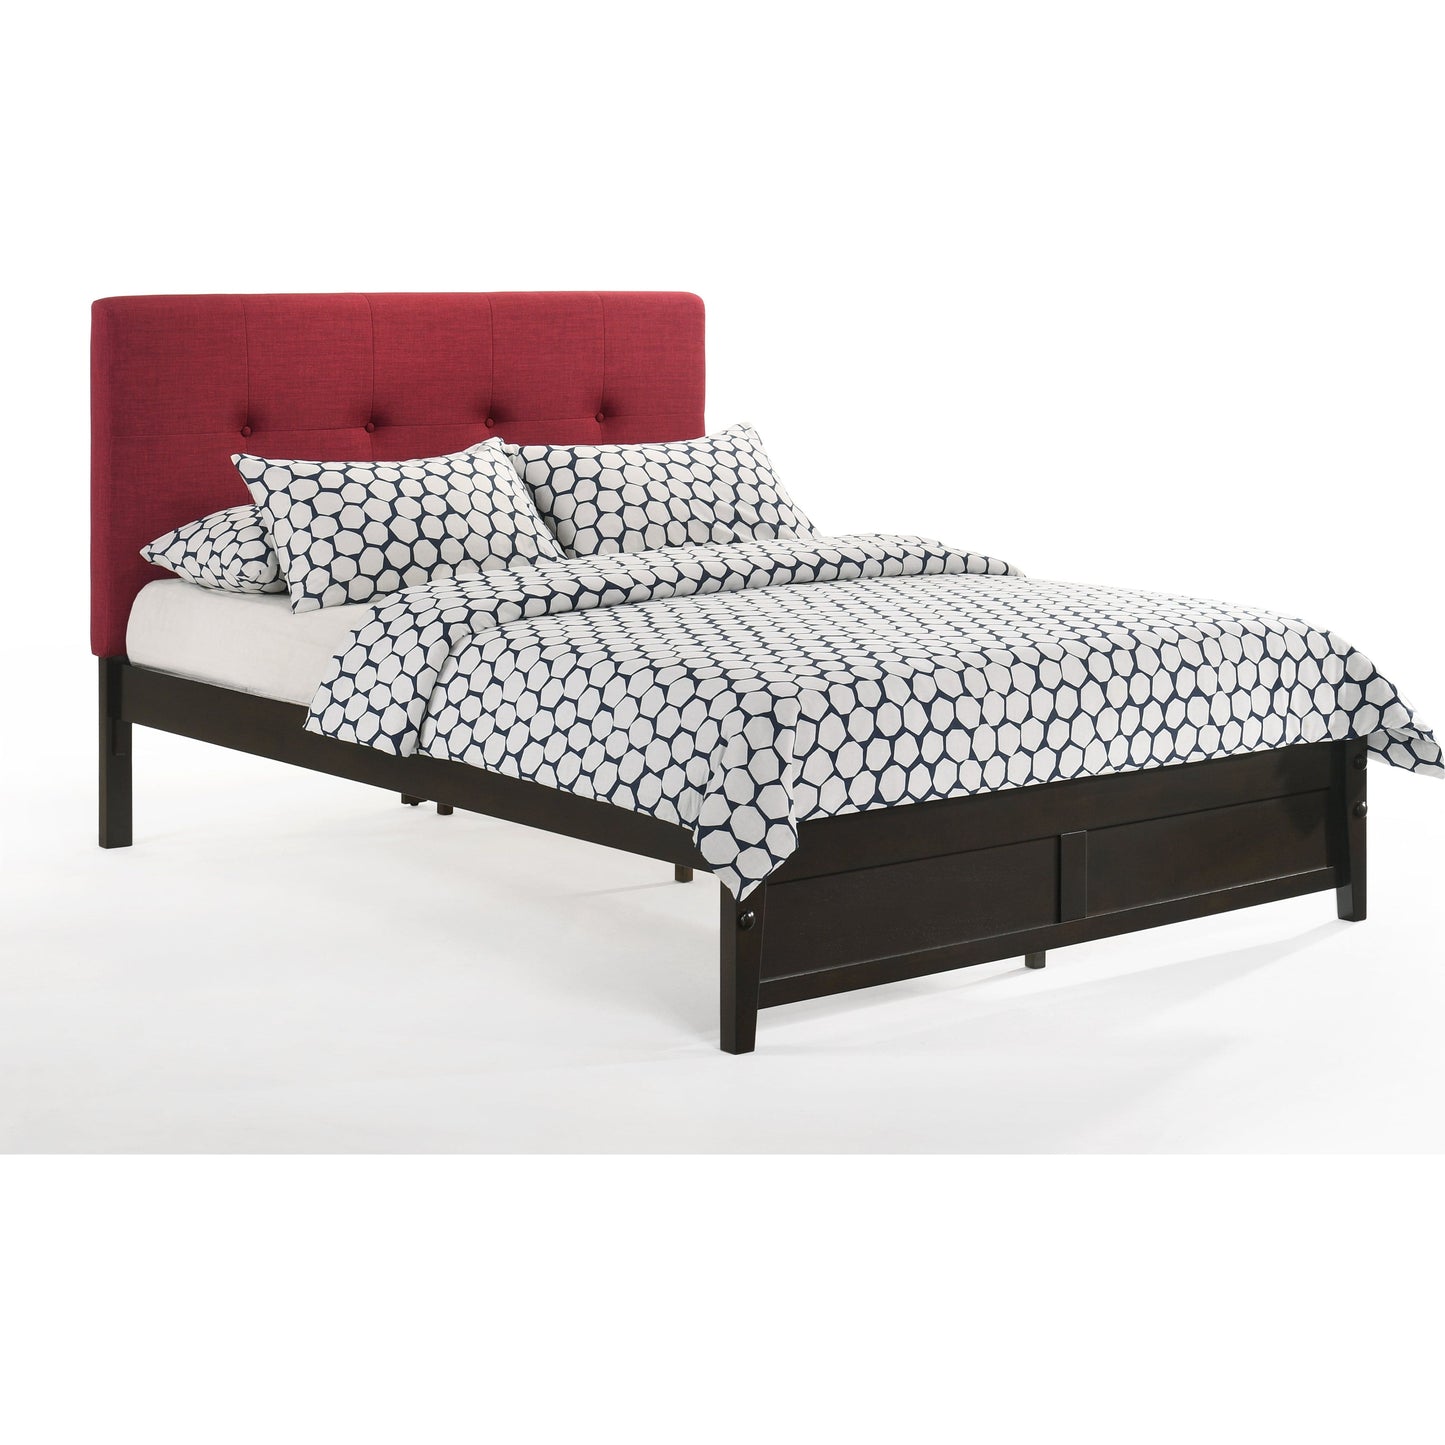 Night and Day Paprika Full Bed in Charcoal with Chocolate Finish Frame (K Series) Red PAP-KH-FUL-CC-RD-COM